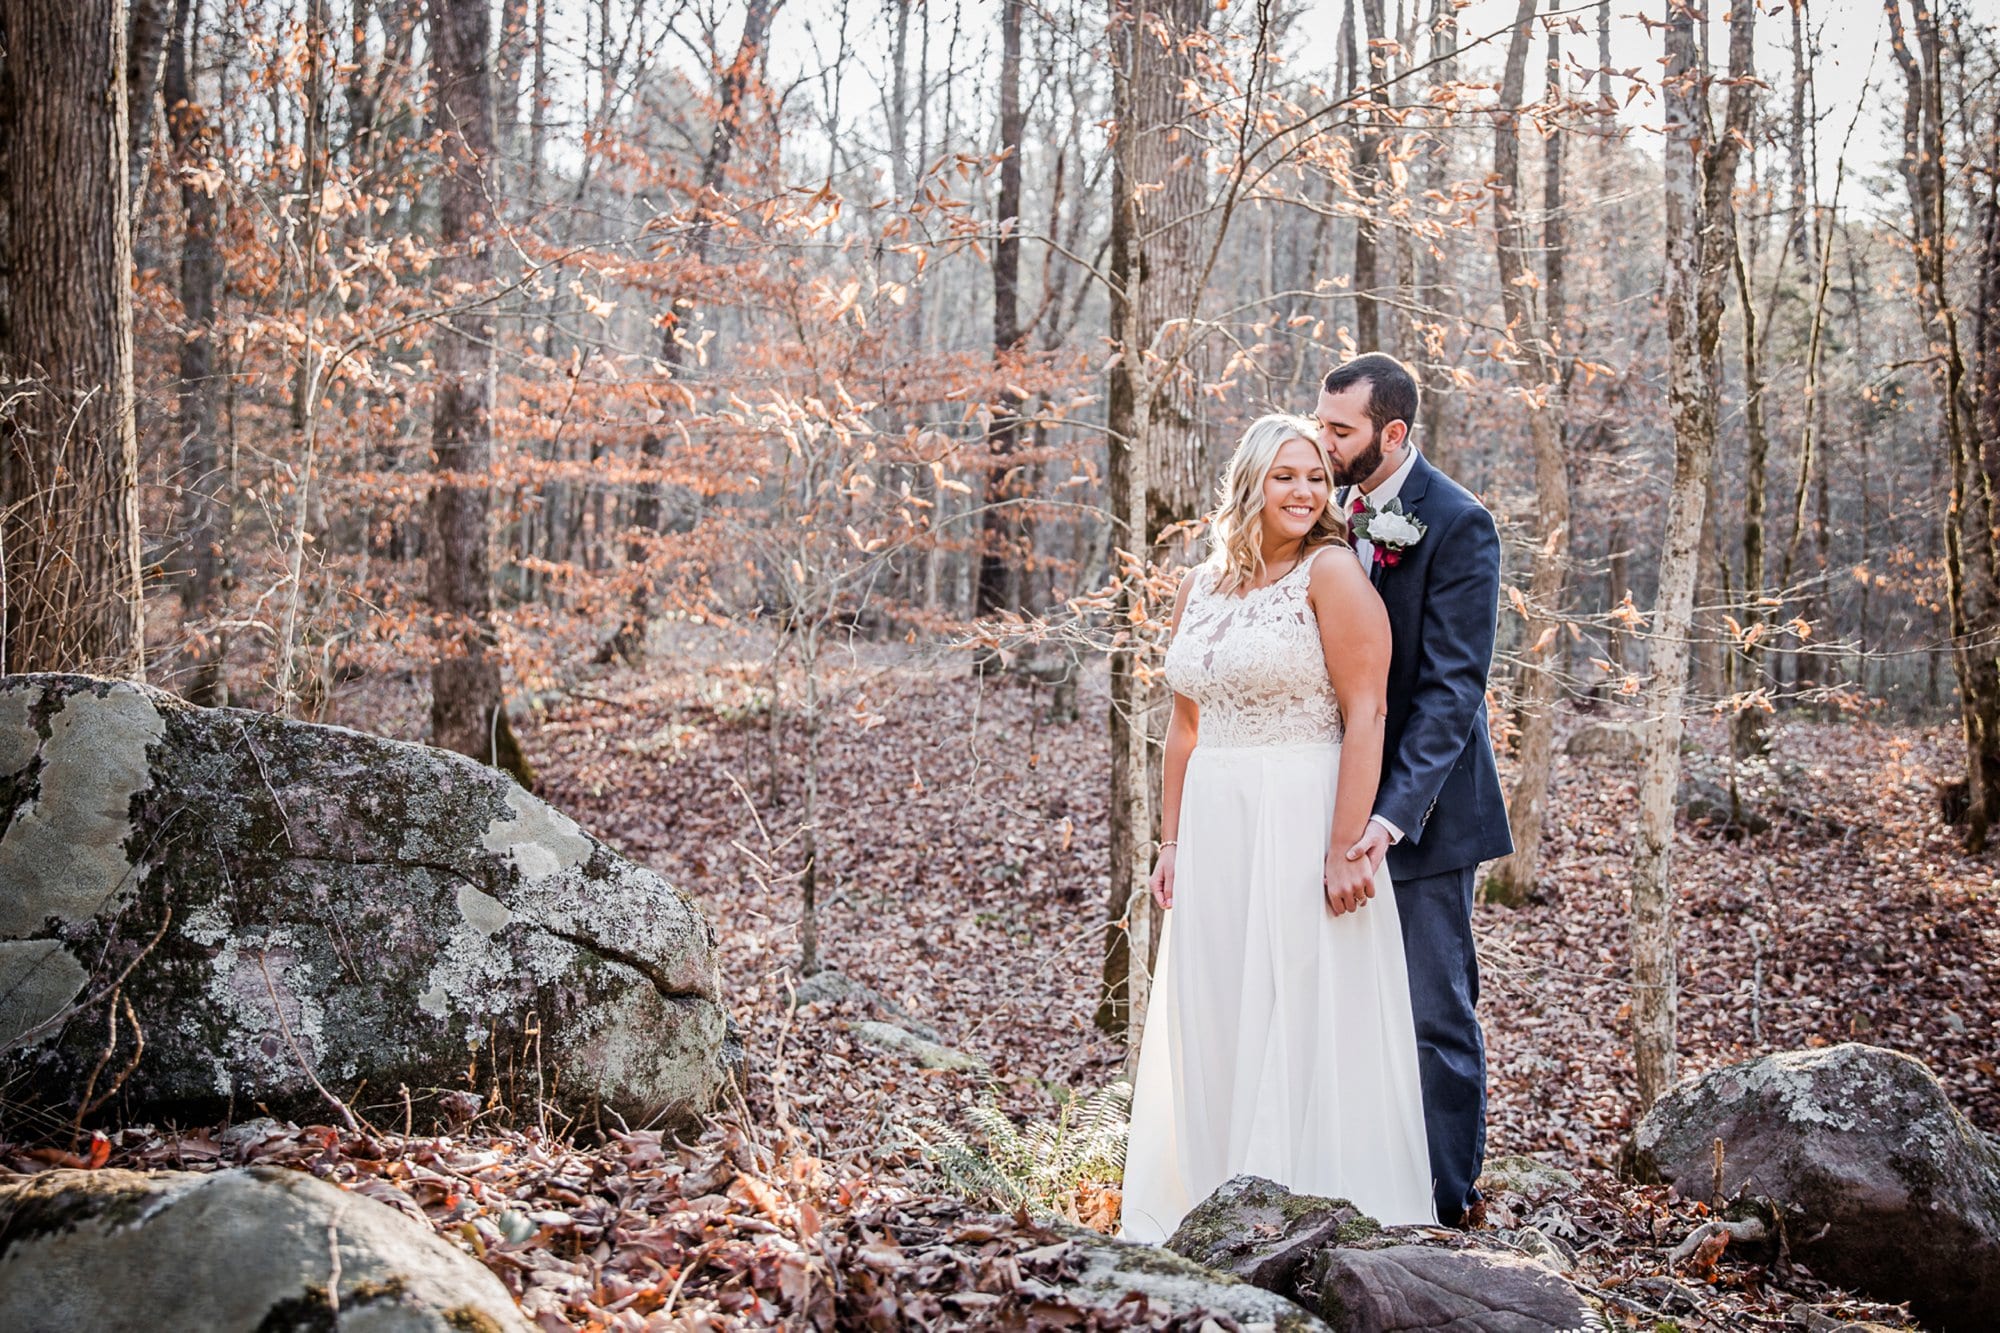 Outdoor Wedding Portraits at Intimate Weddings in the Smoky Mountains